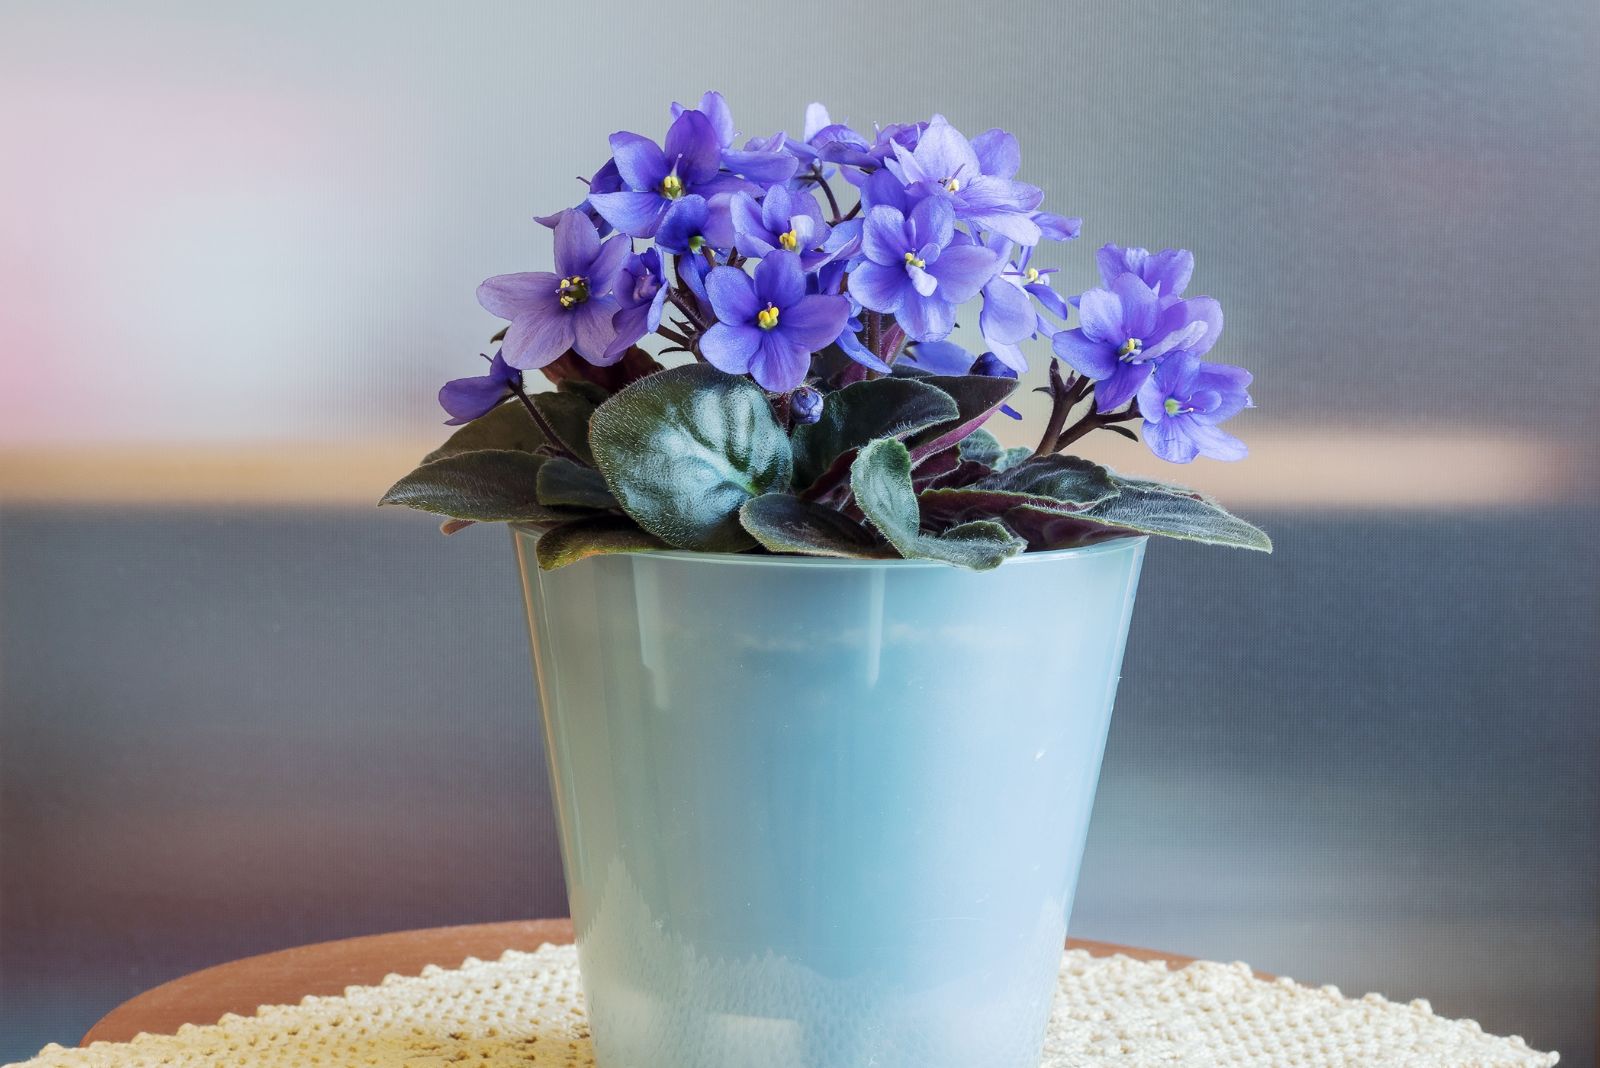 Blooming domestic blue perennial African violet (Saintpaulia) in a flower pot